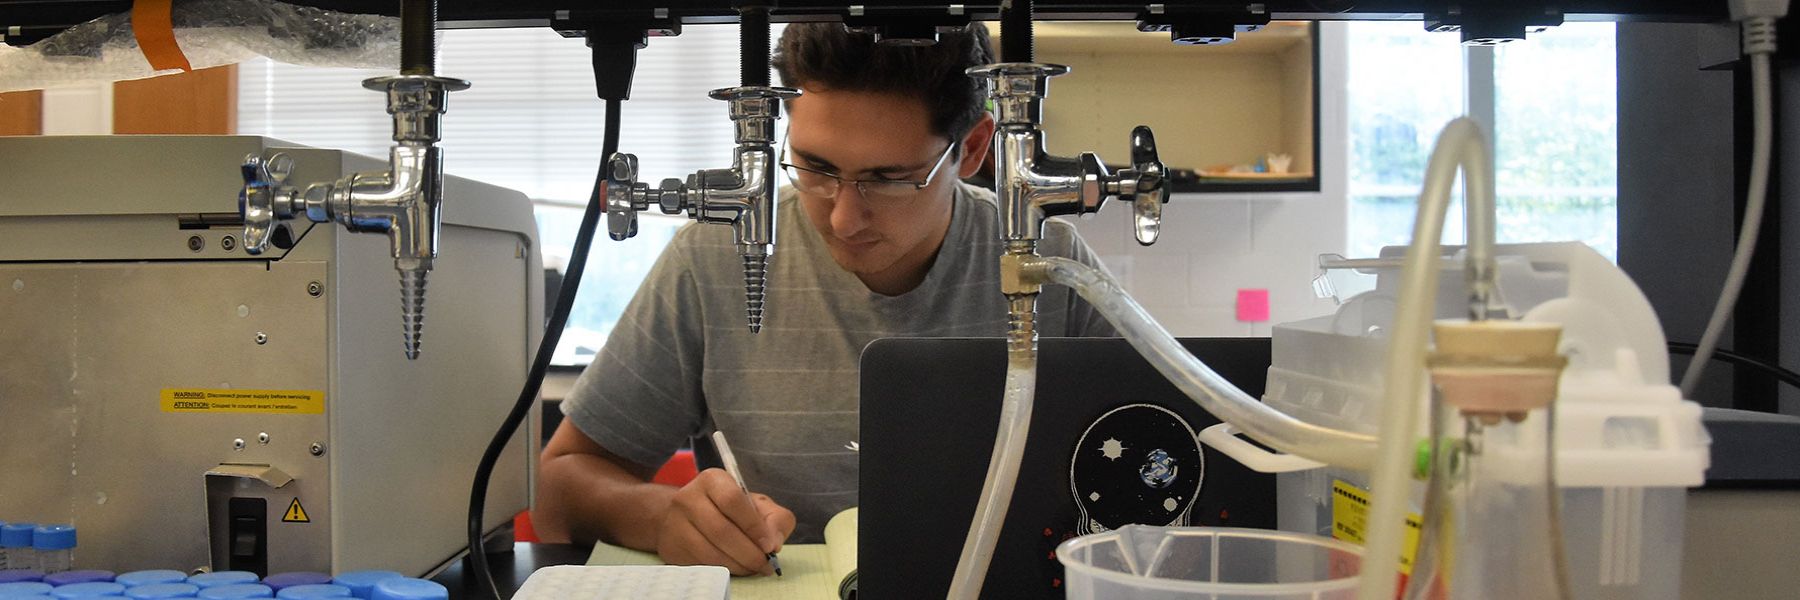 Student working in a chemistry lab